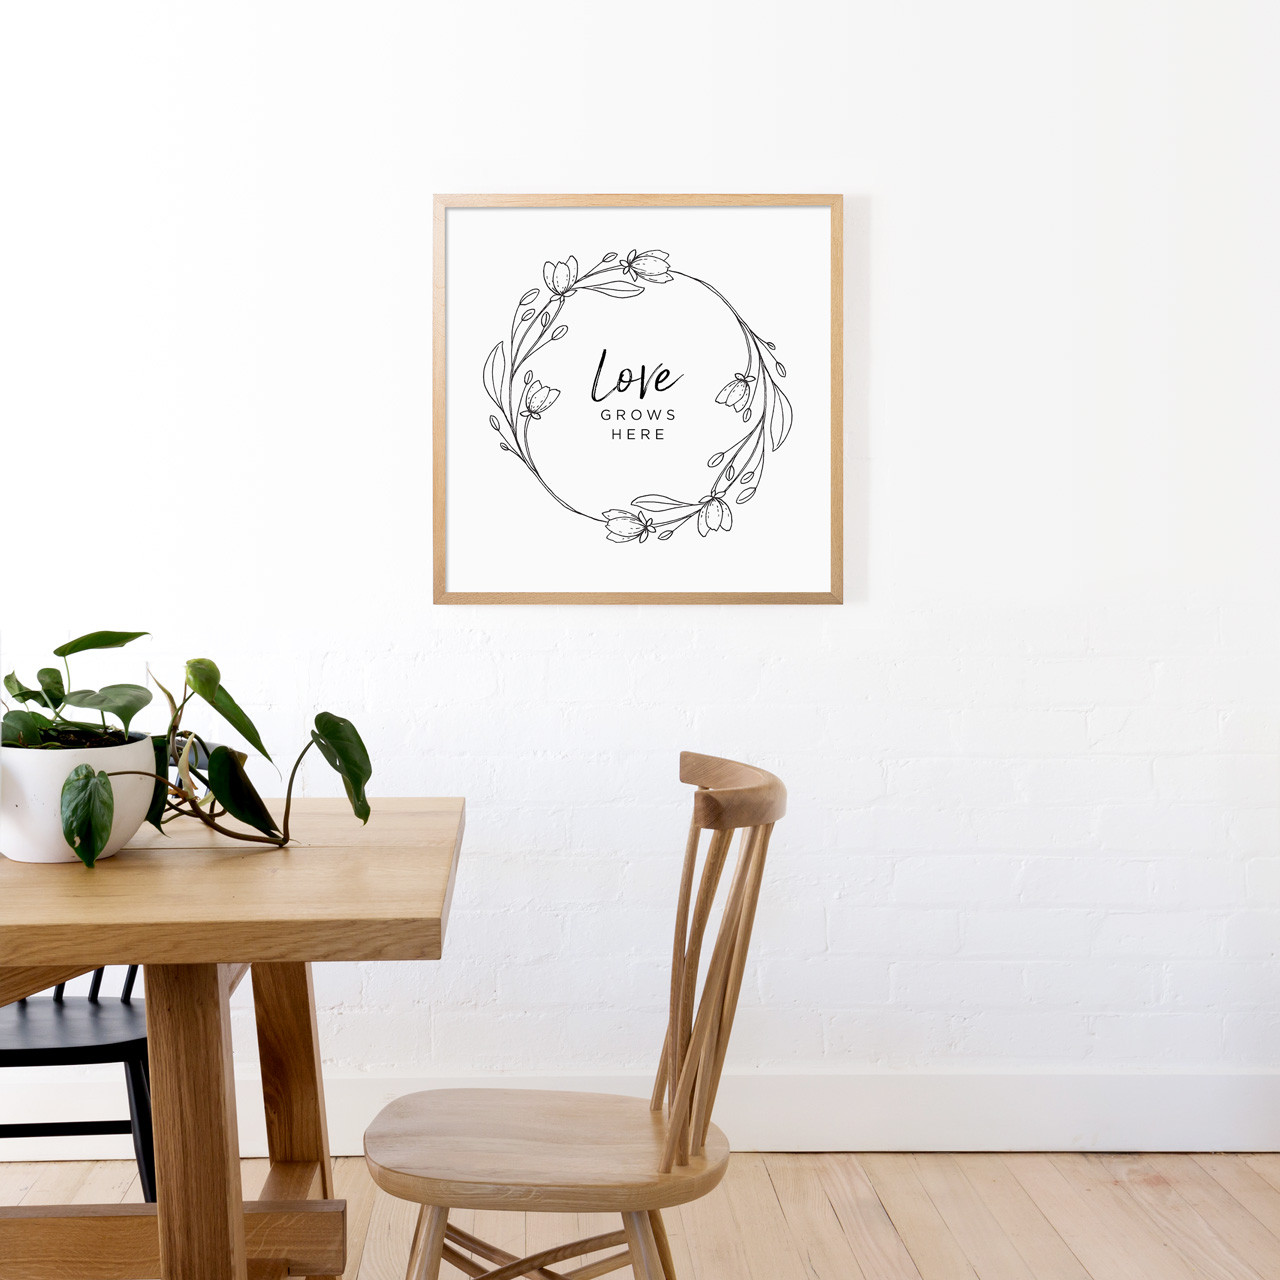 'Love Grows Here' Art Print from The Printed Home (Printable)